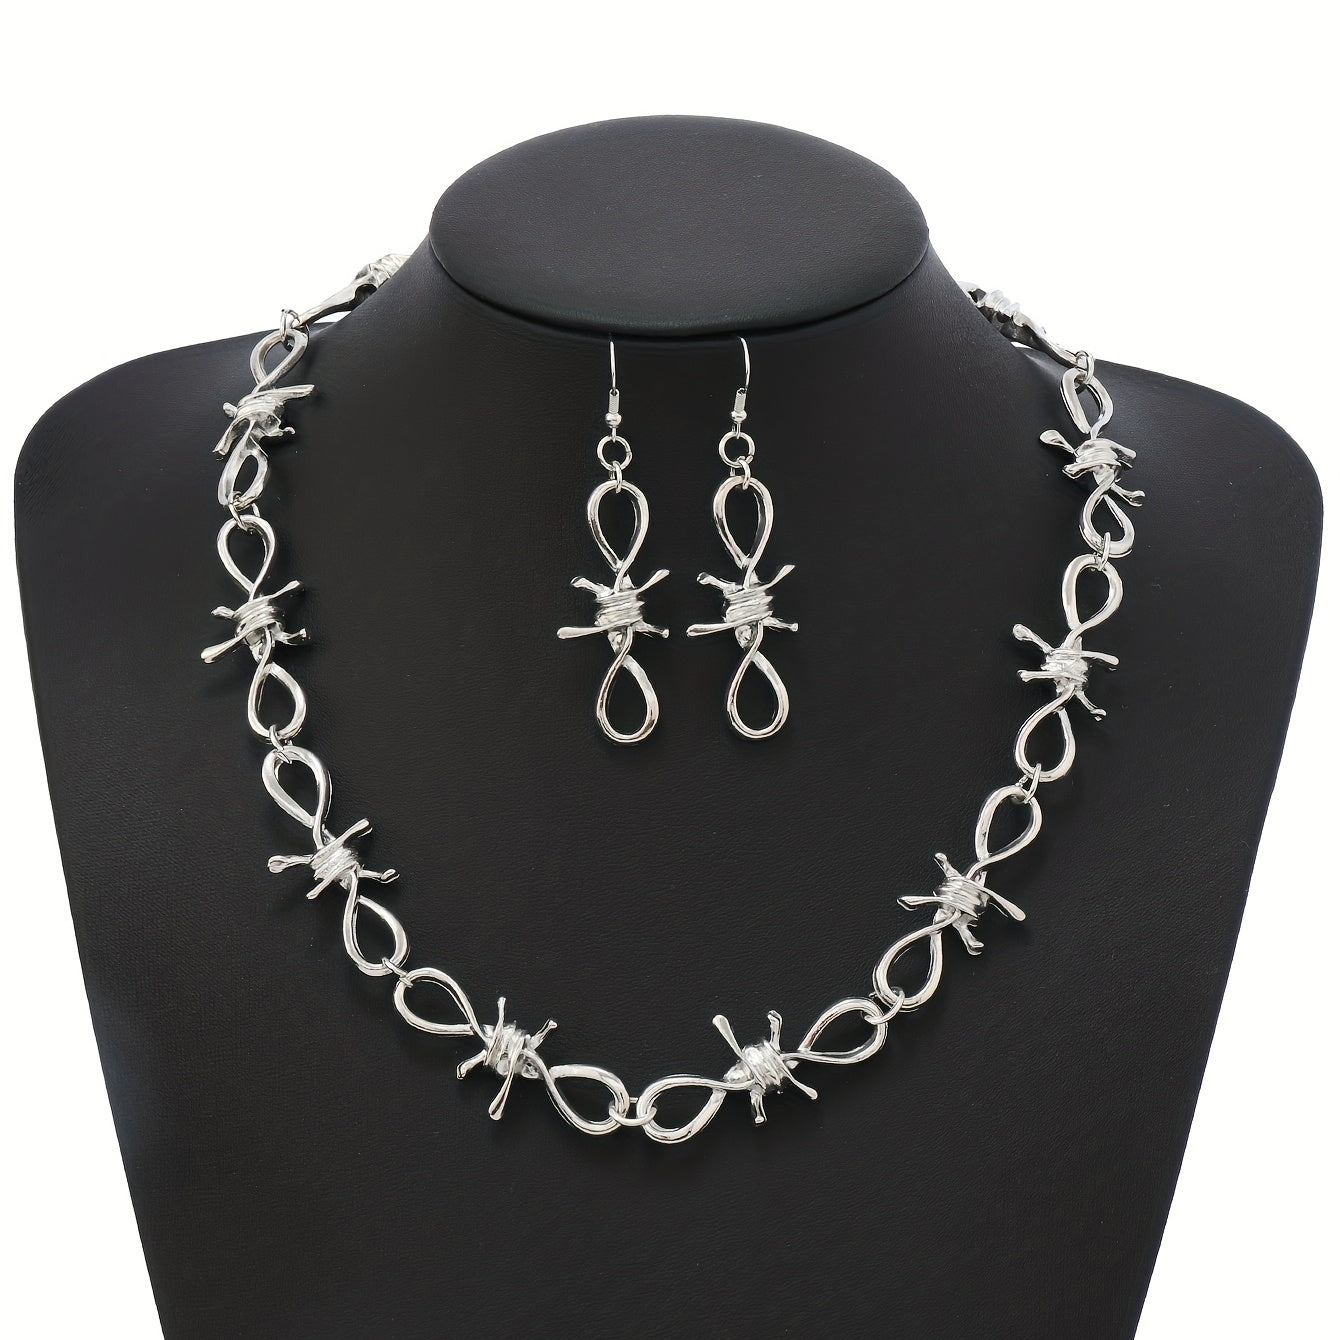 3pcs Earrings Plus Necklace Punk Style Jewelry Set Trendy Thorn Design Match Daily Outfits Suitable For Men And Women